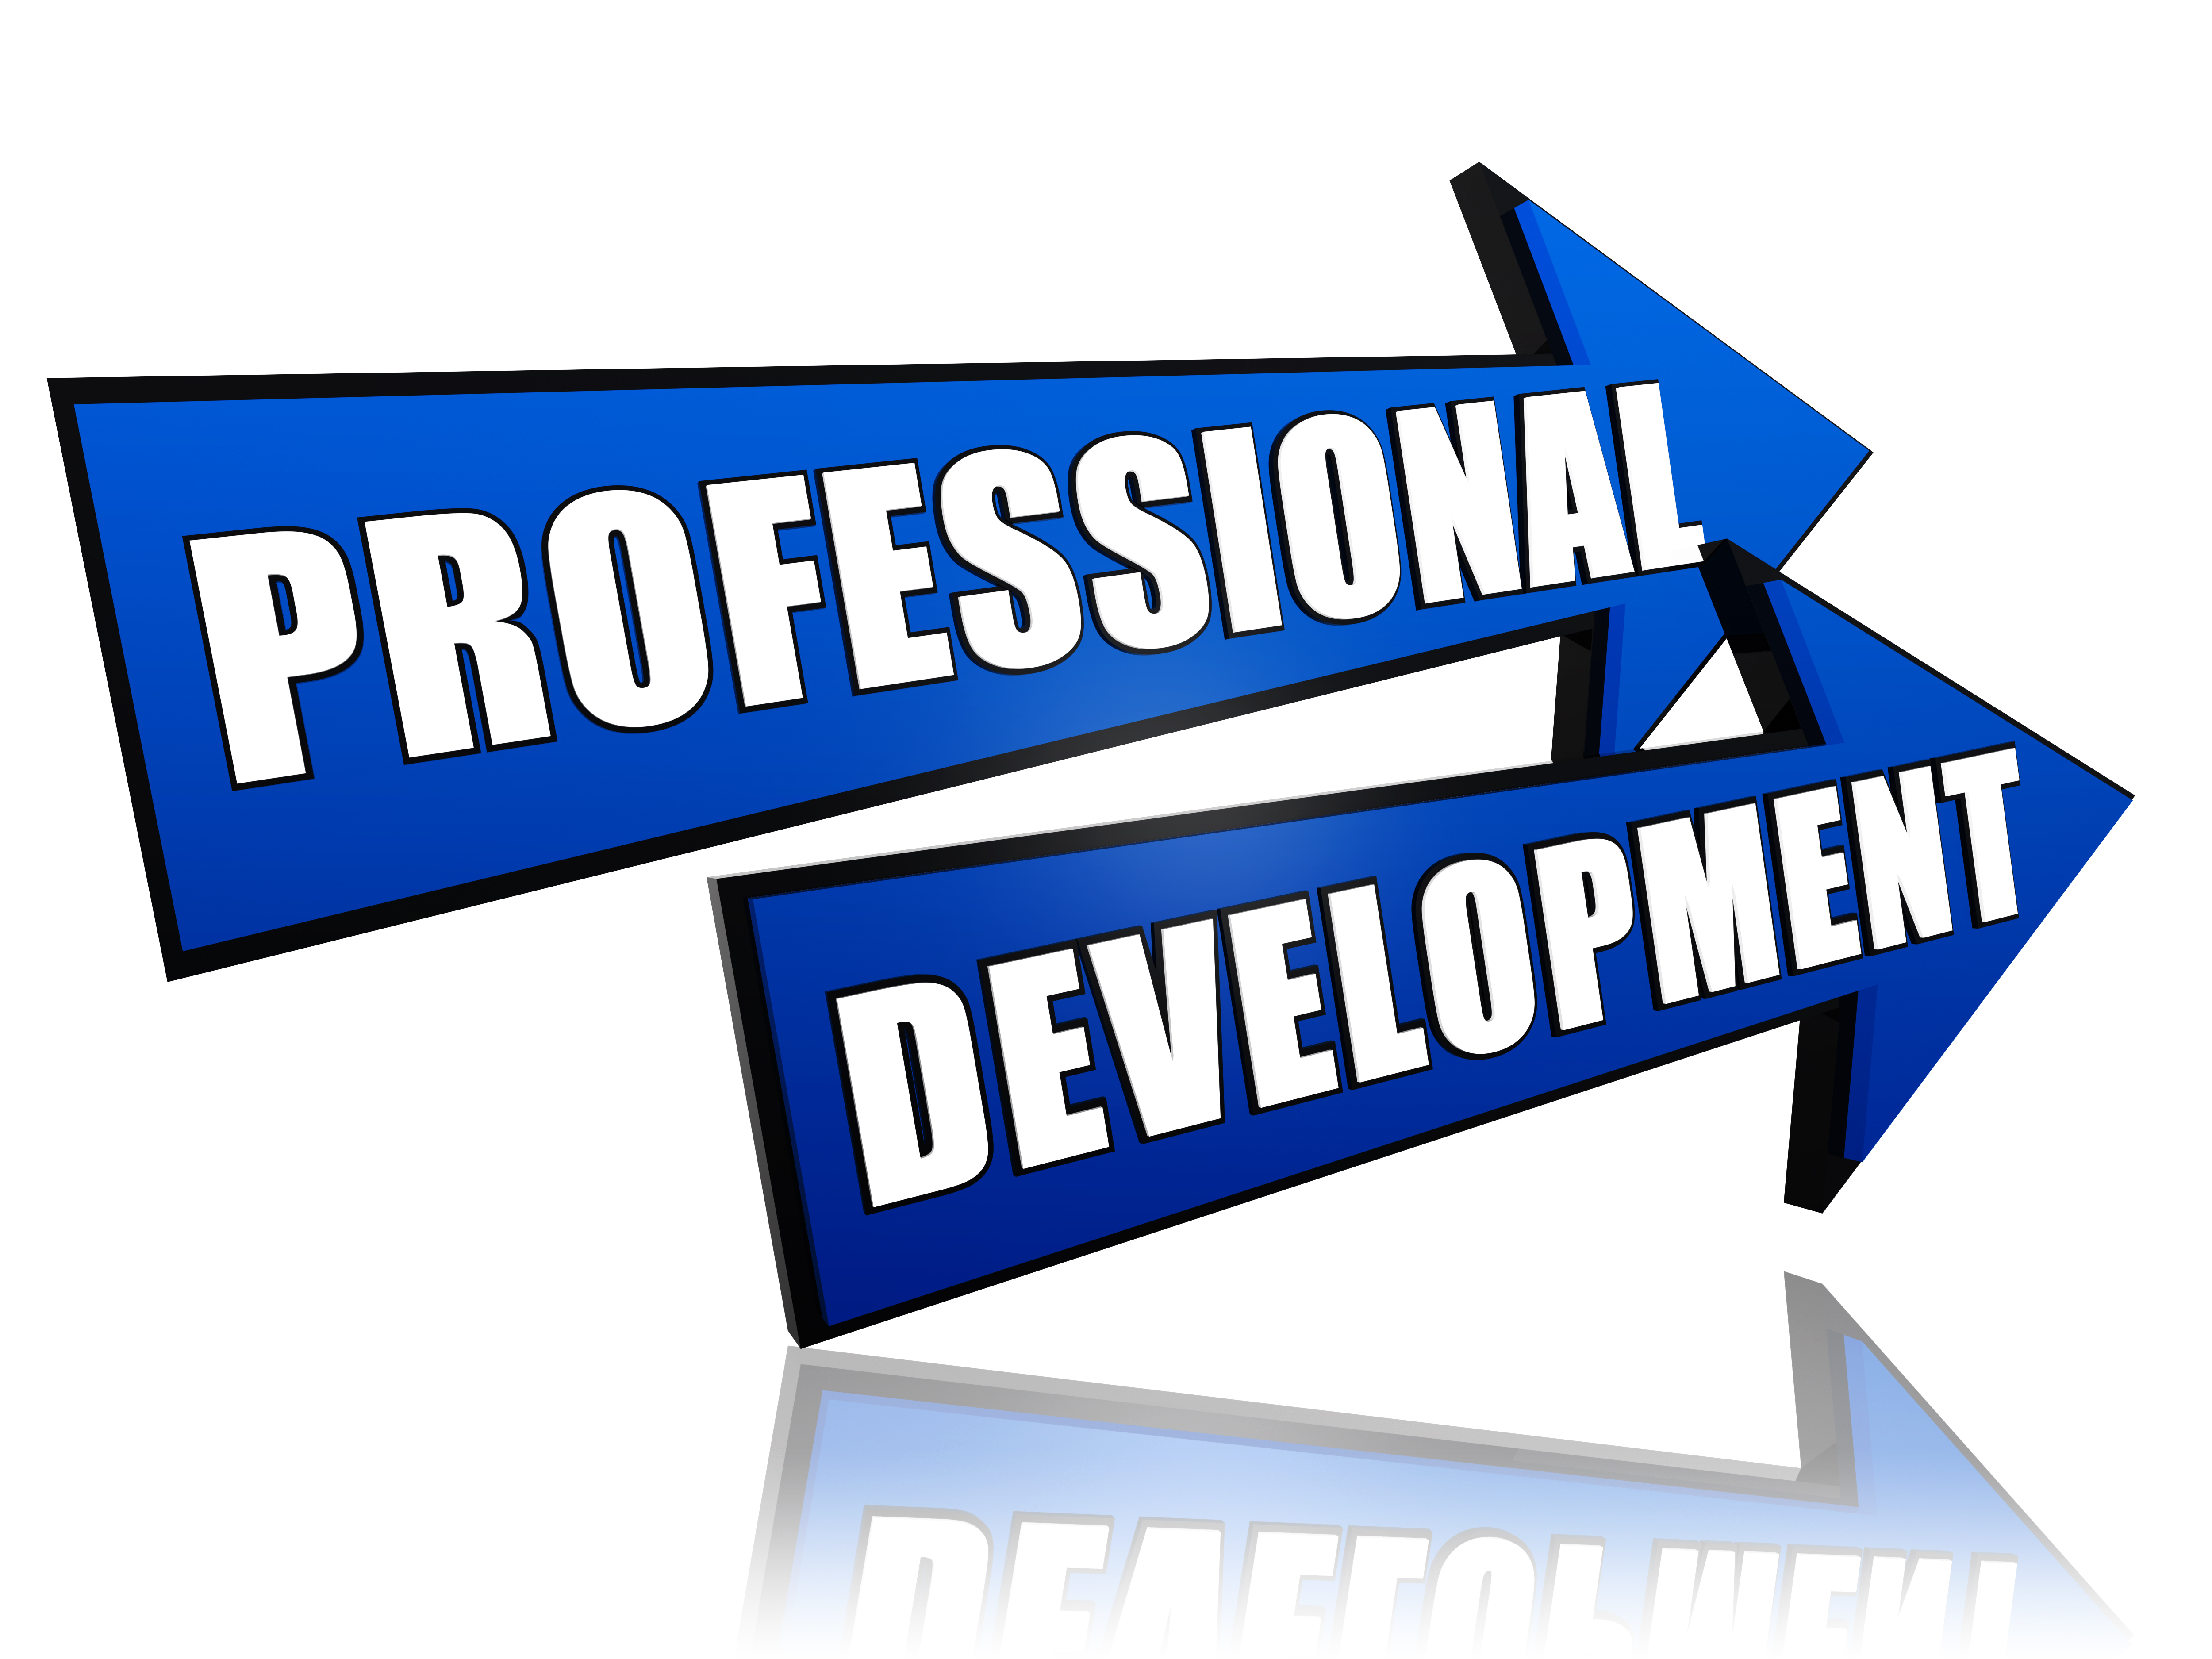 Professional Development Through An Engaging And Rewarding Experience